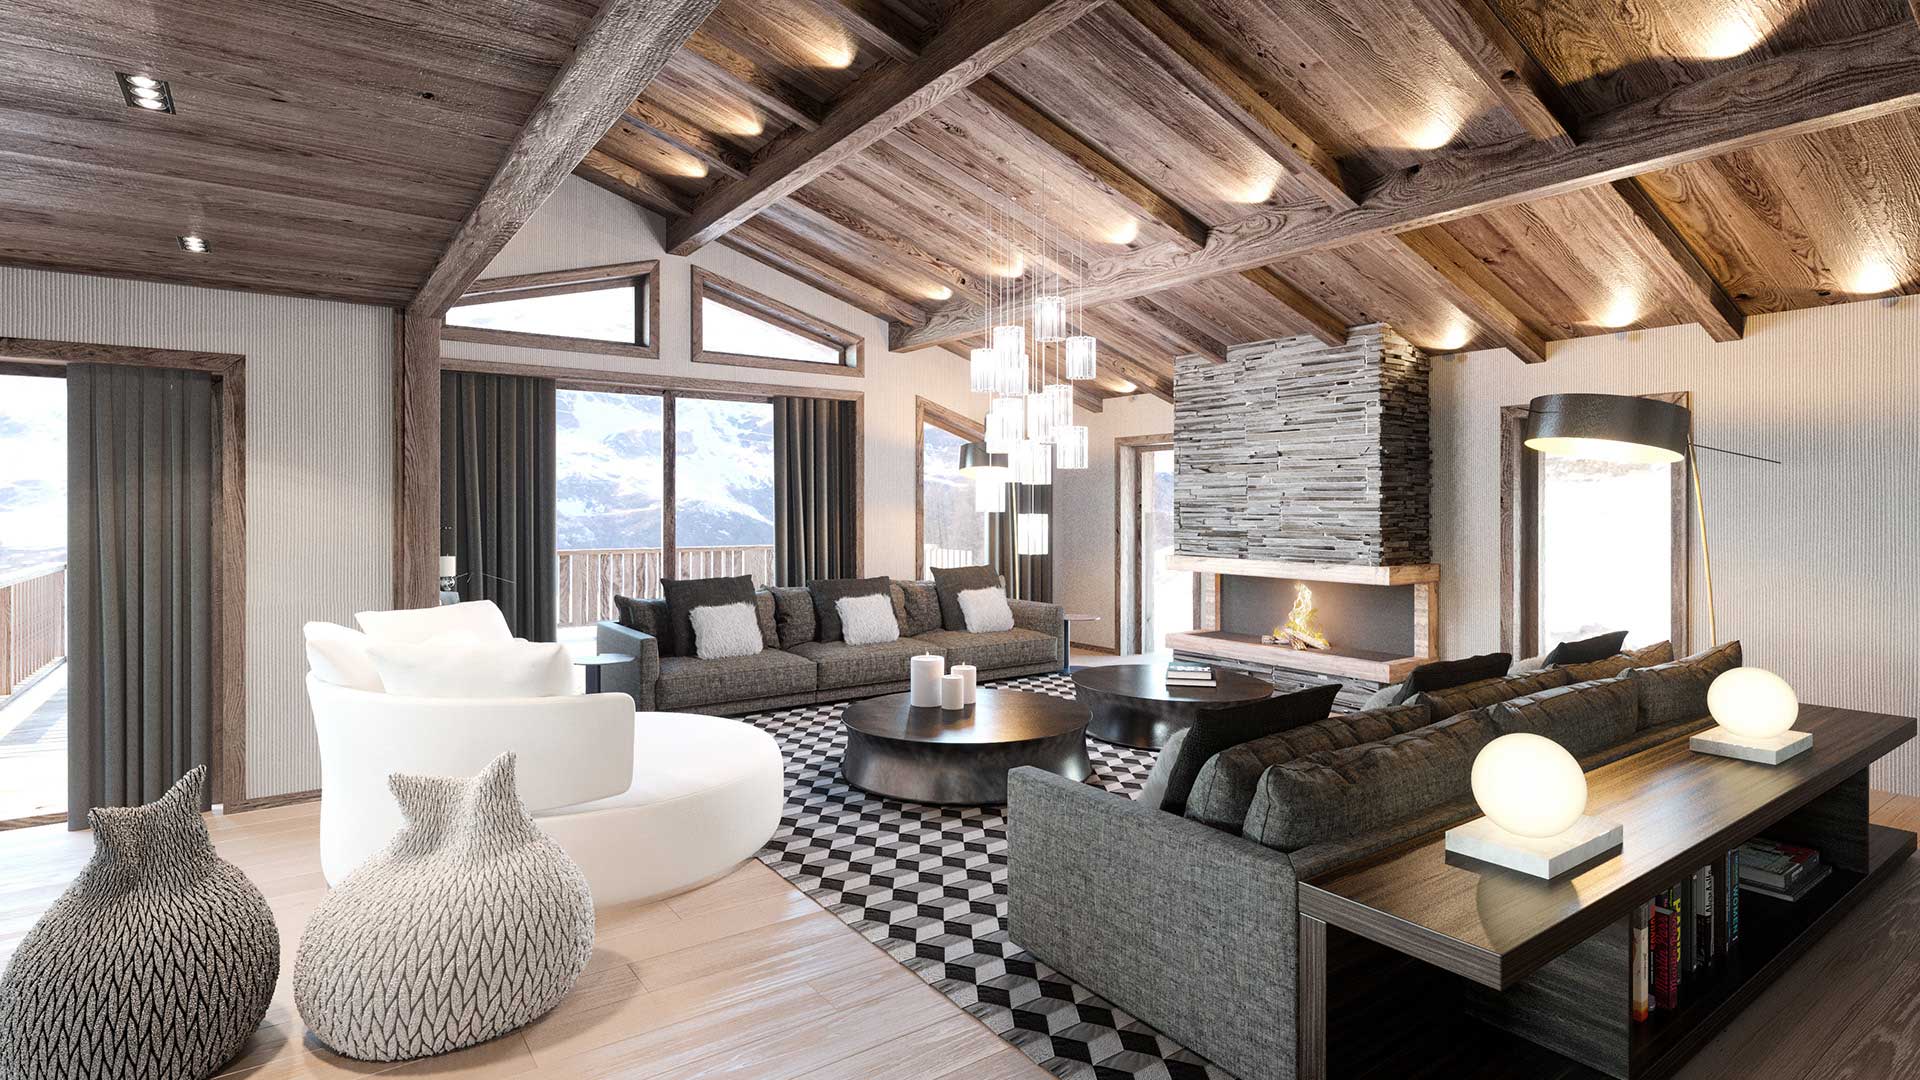 3D Living room of a luxurious chalet created by the 3D studio Valentin Studio.